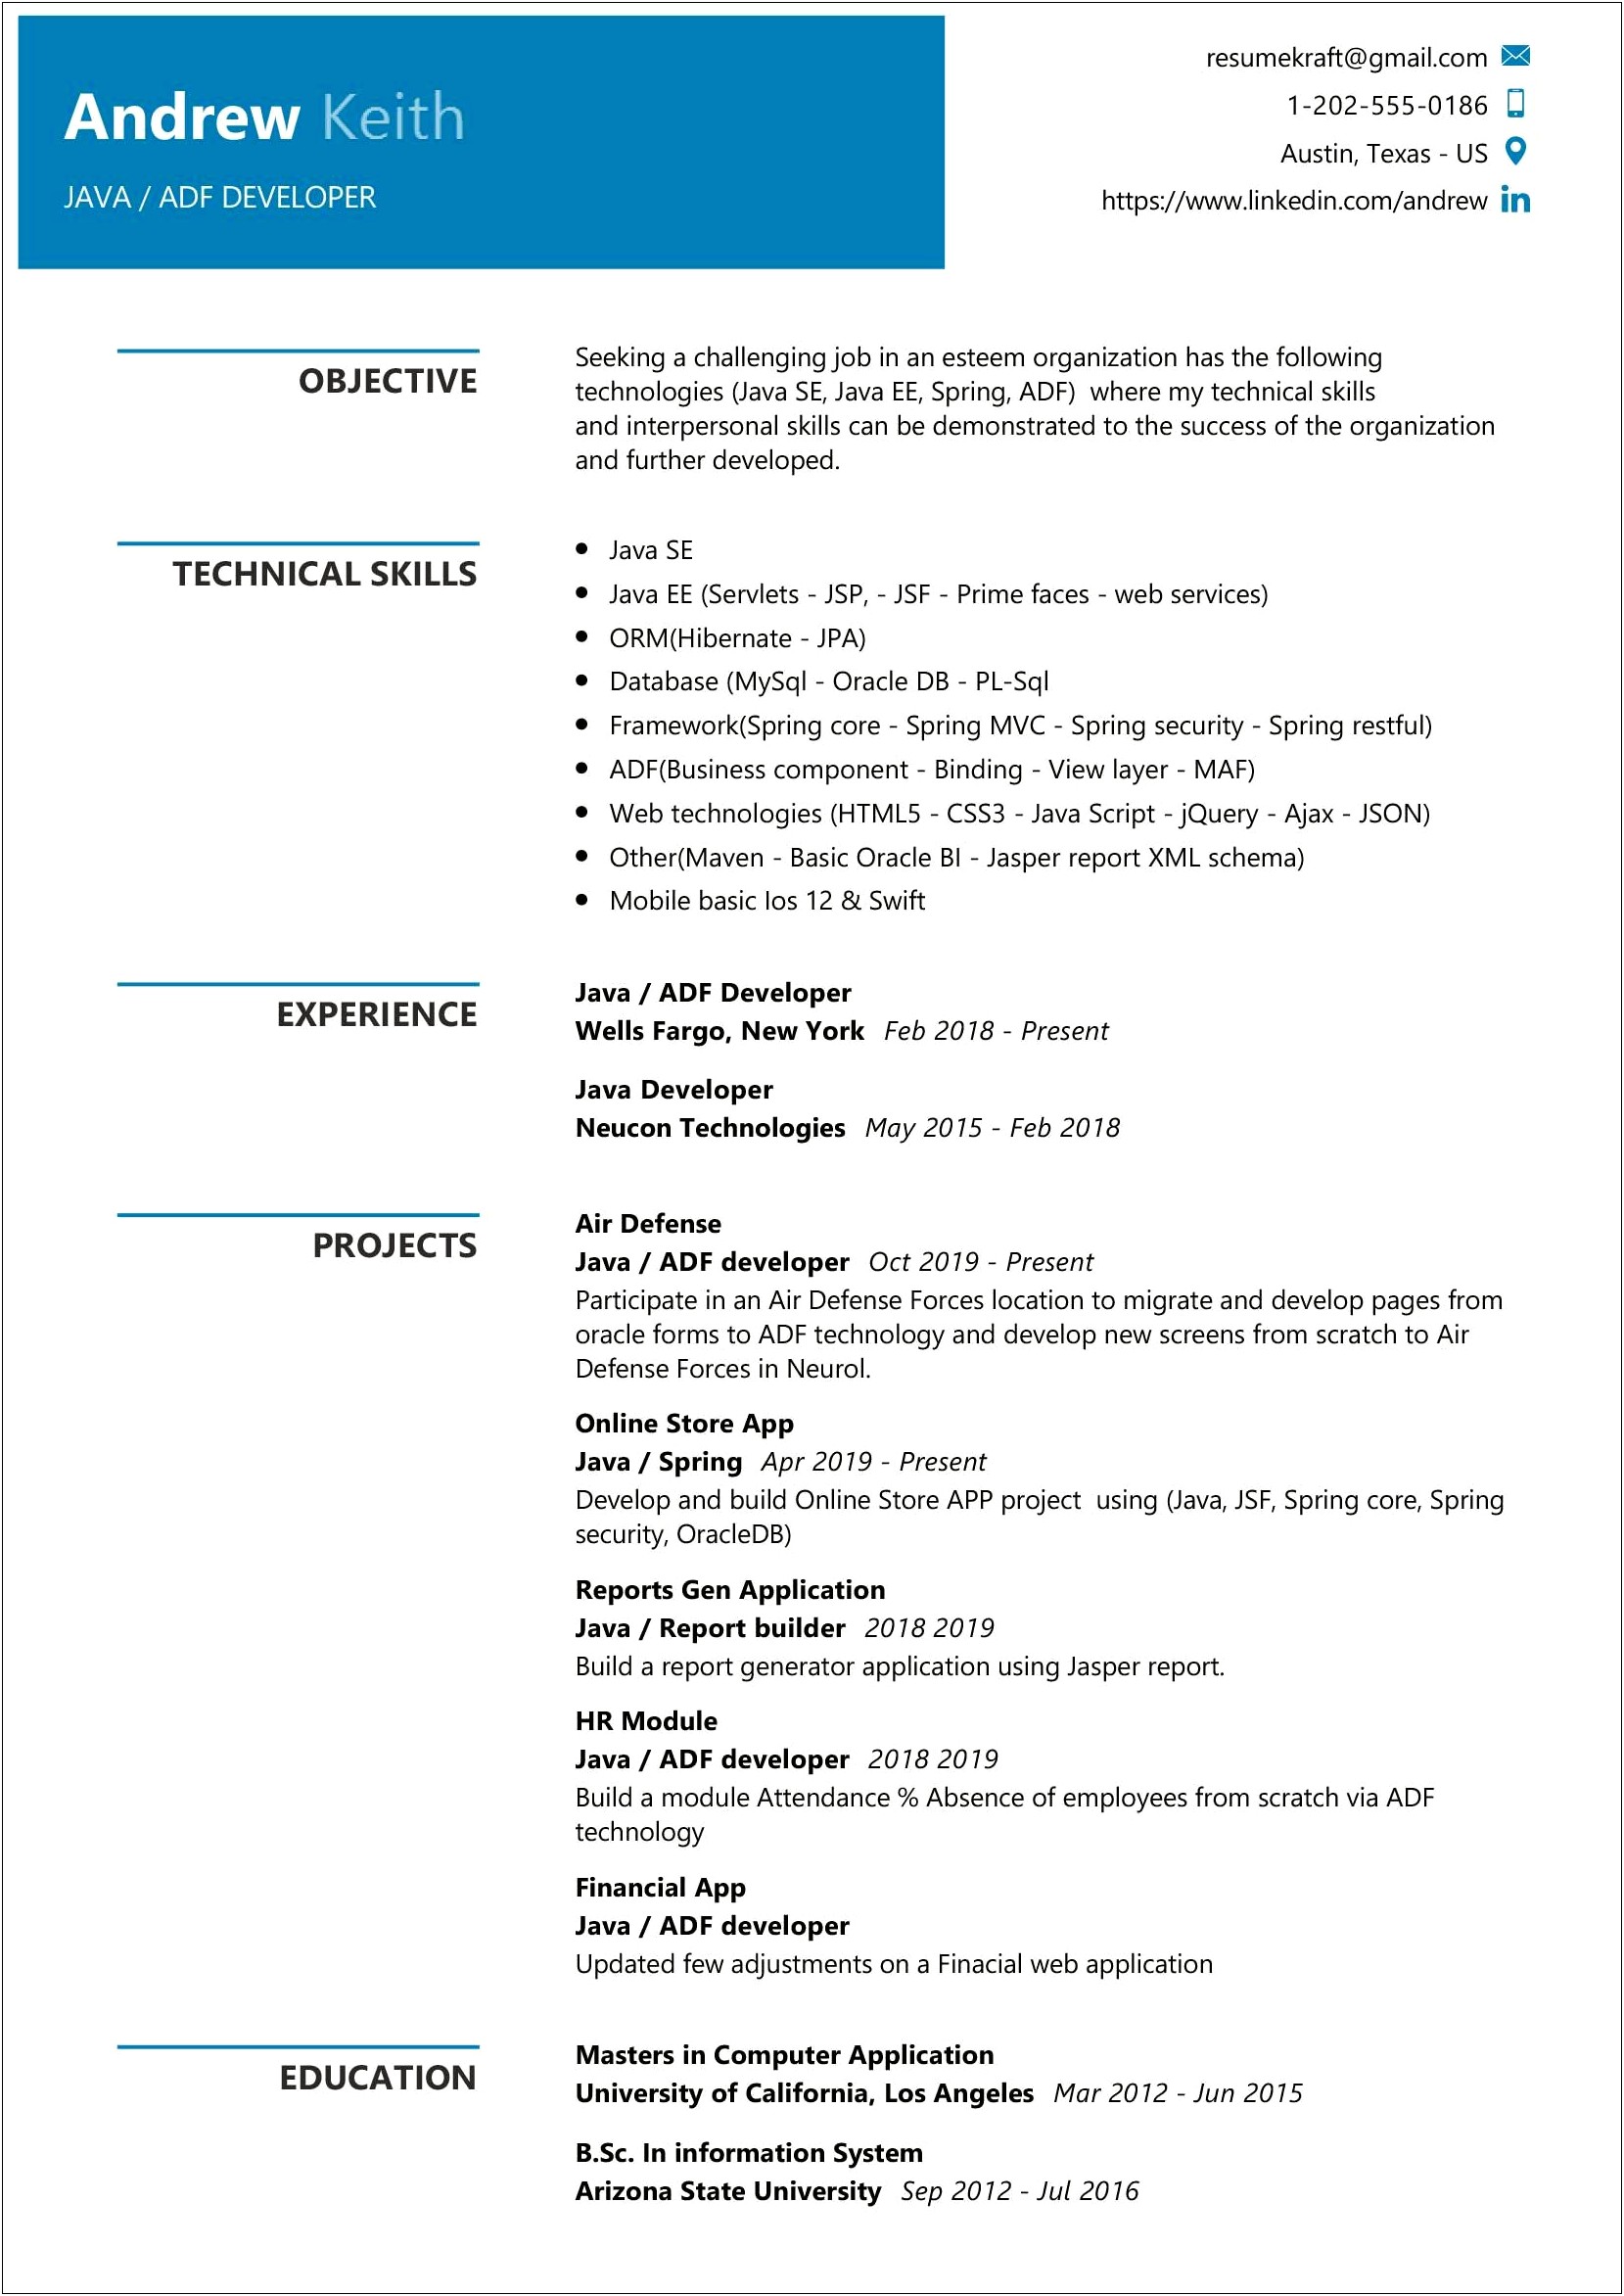 Oracle Developer Resume For 10 Years Experience